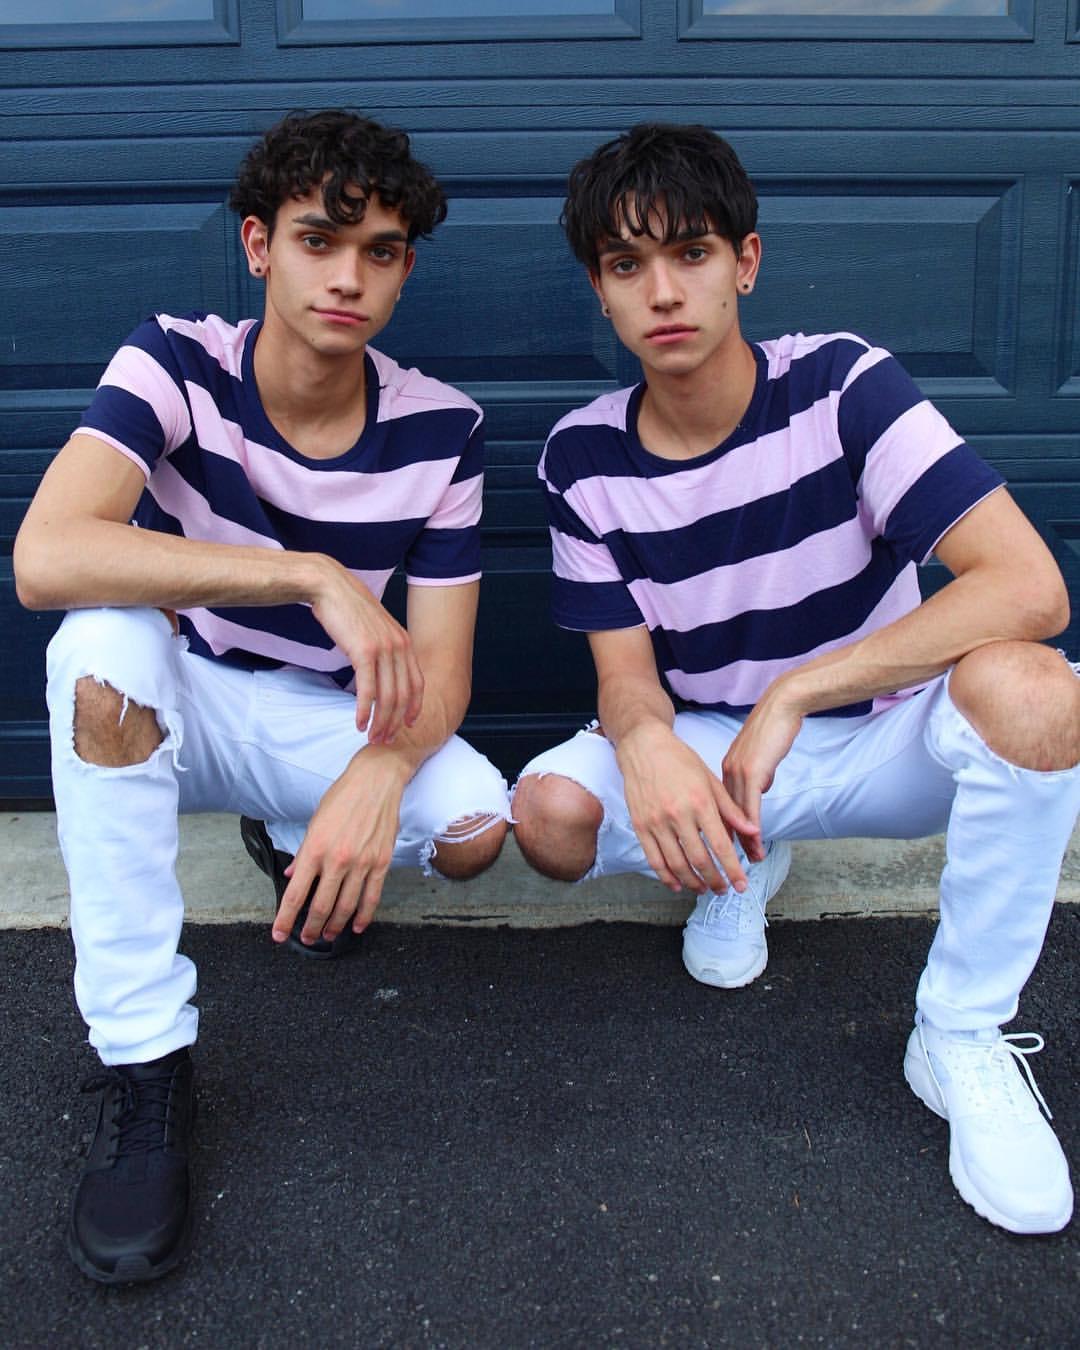 Lucas and Marcus скриншот 7.